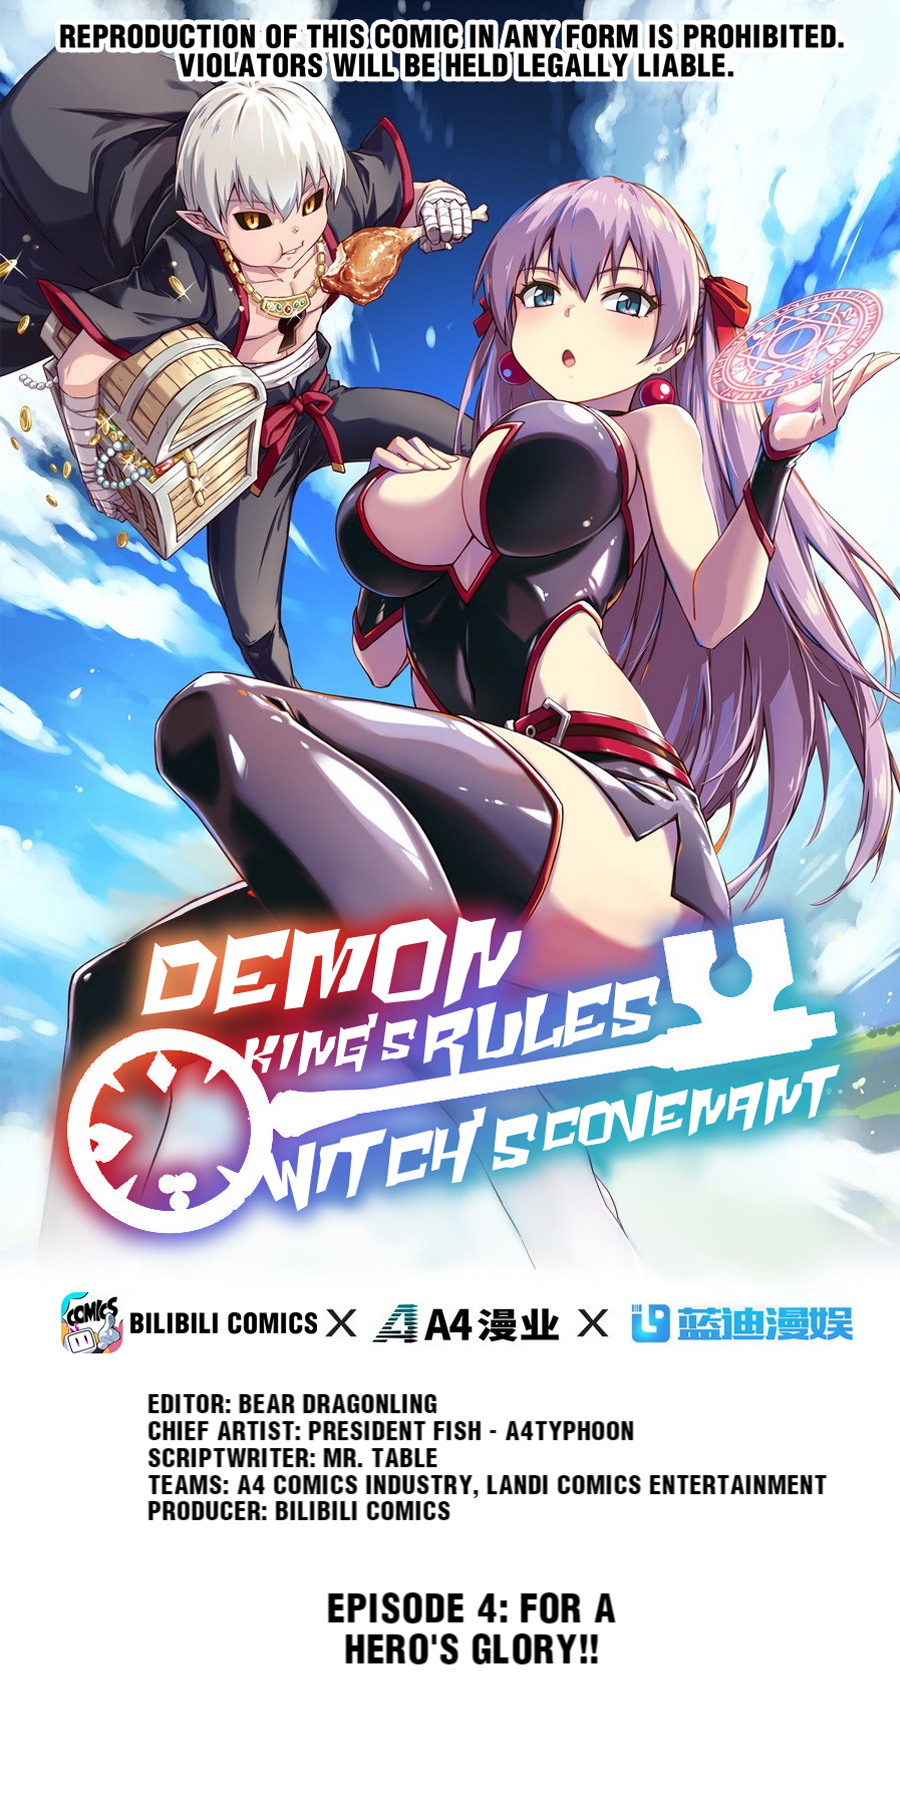 Demon King's Rules X Witch's Covenant Vol.1 Chapter 4